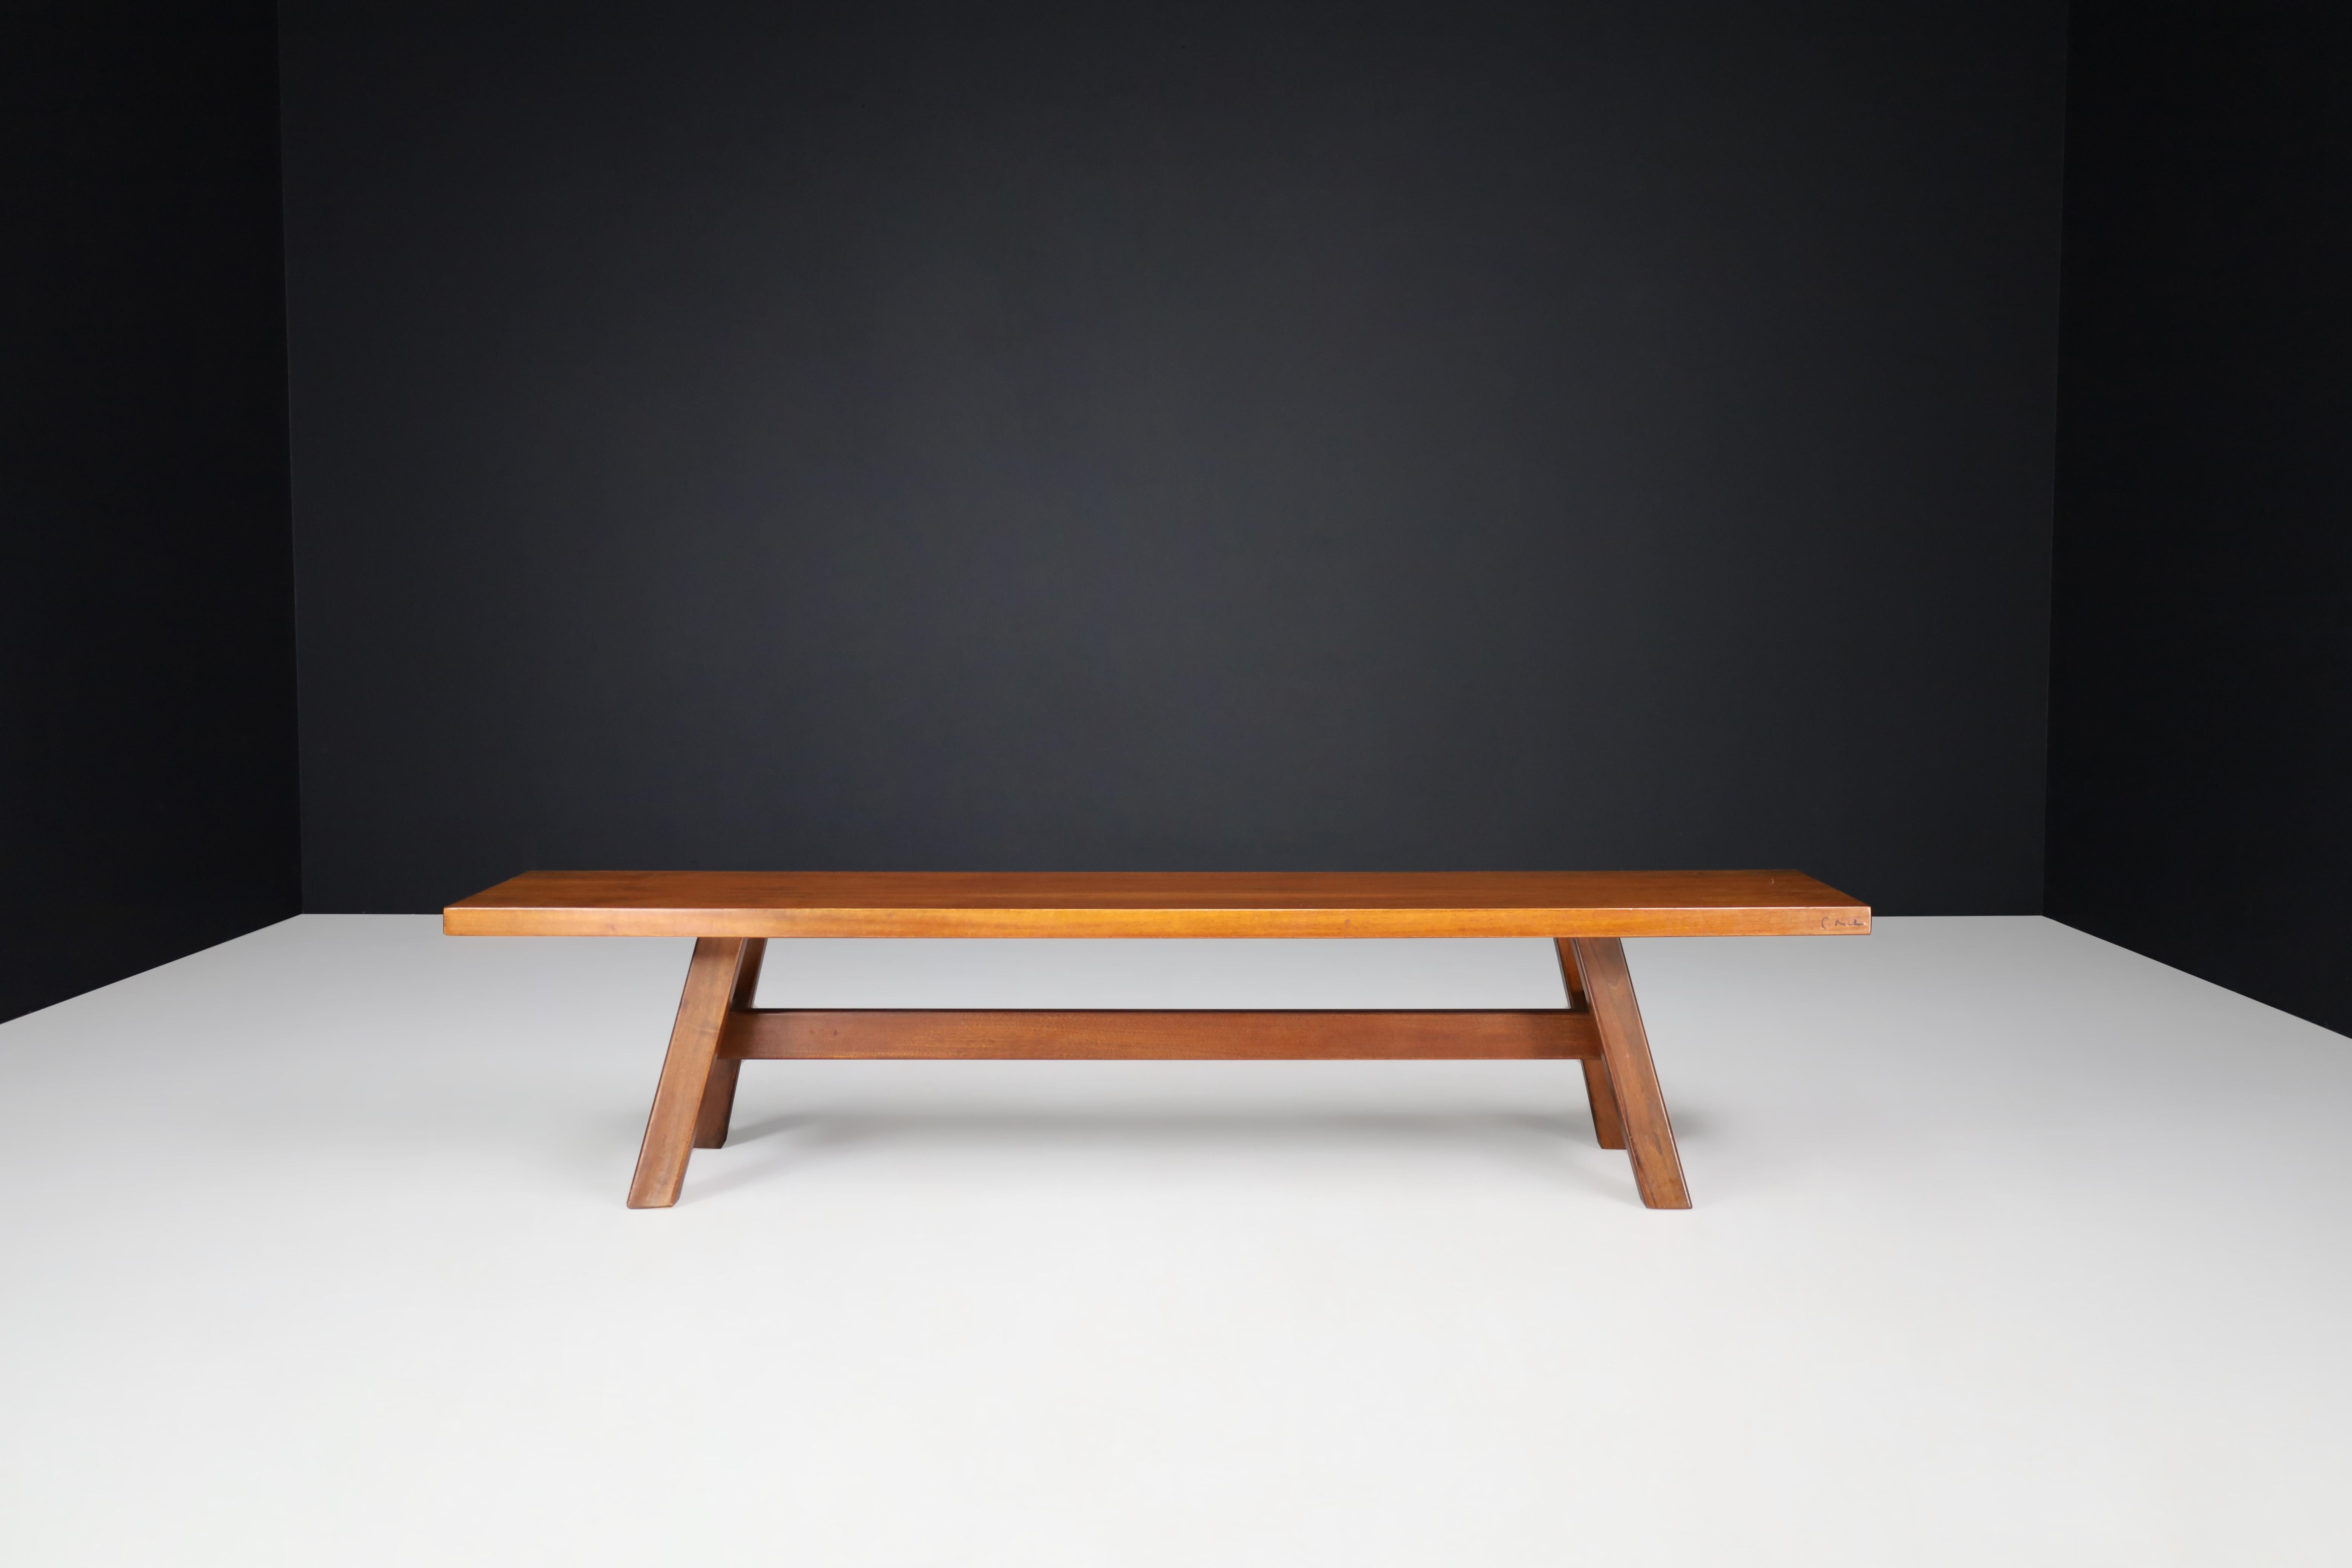 Midcentury Giovanni Michelucci Walnut Torbecchia Bench for Poltronova, Italy, 1964

The Torbecchia Walnut Bench, part of the Torbecchia series designed by Giovanni Michelucci for Poltronova in 1964, boasts a solid construction with sharp edges and